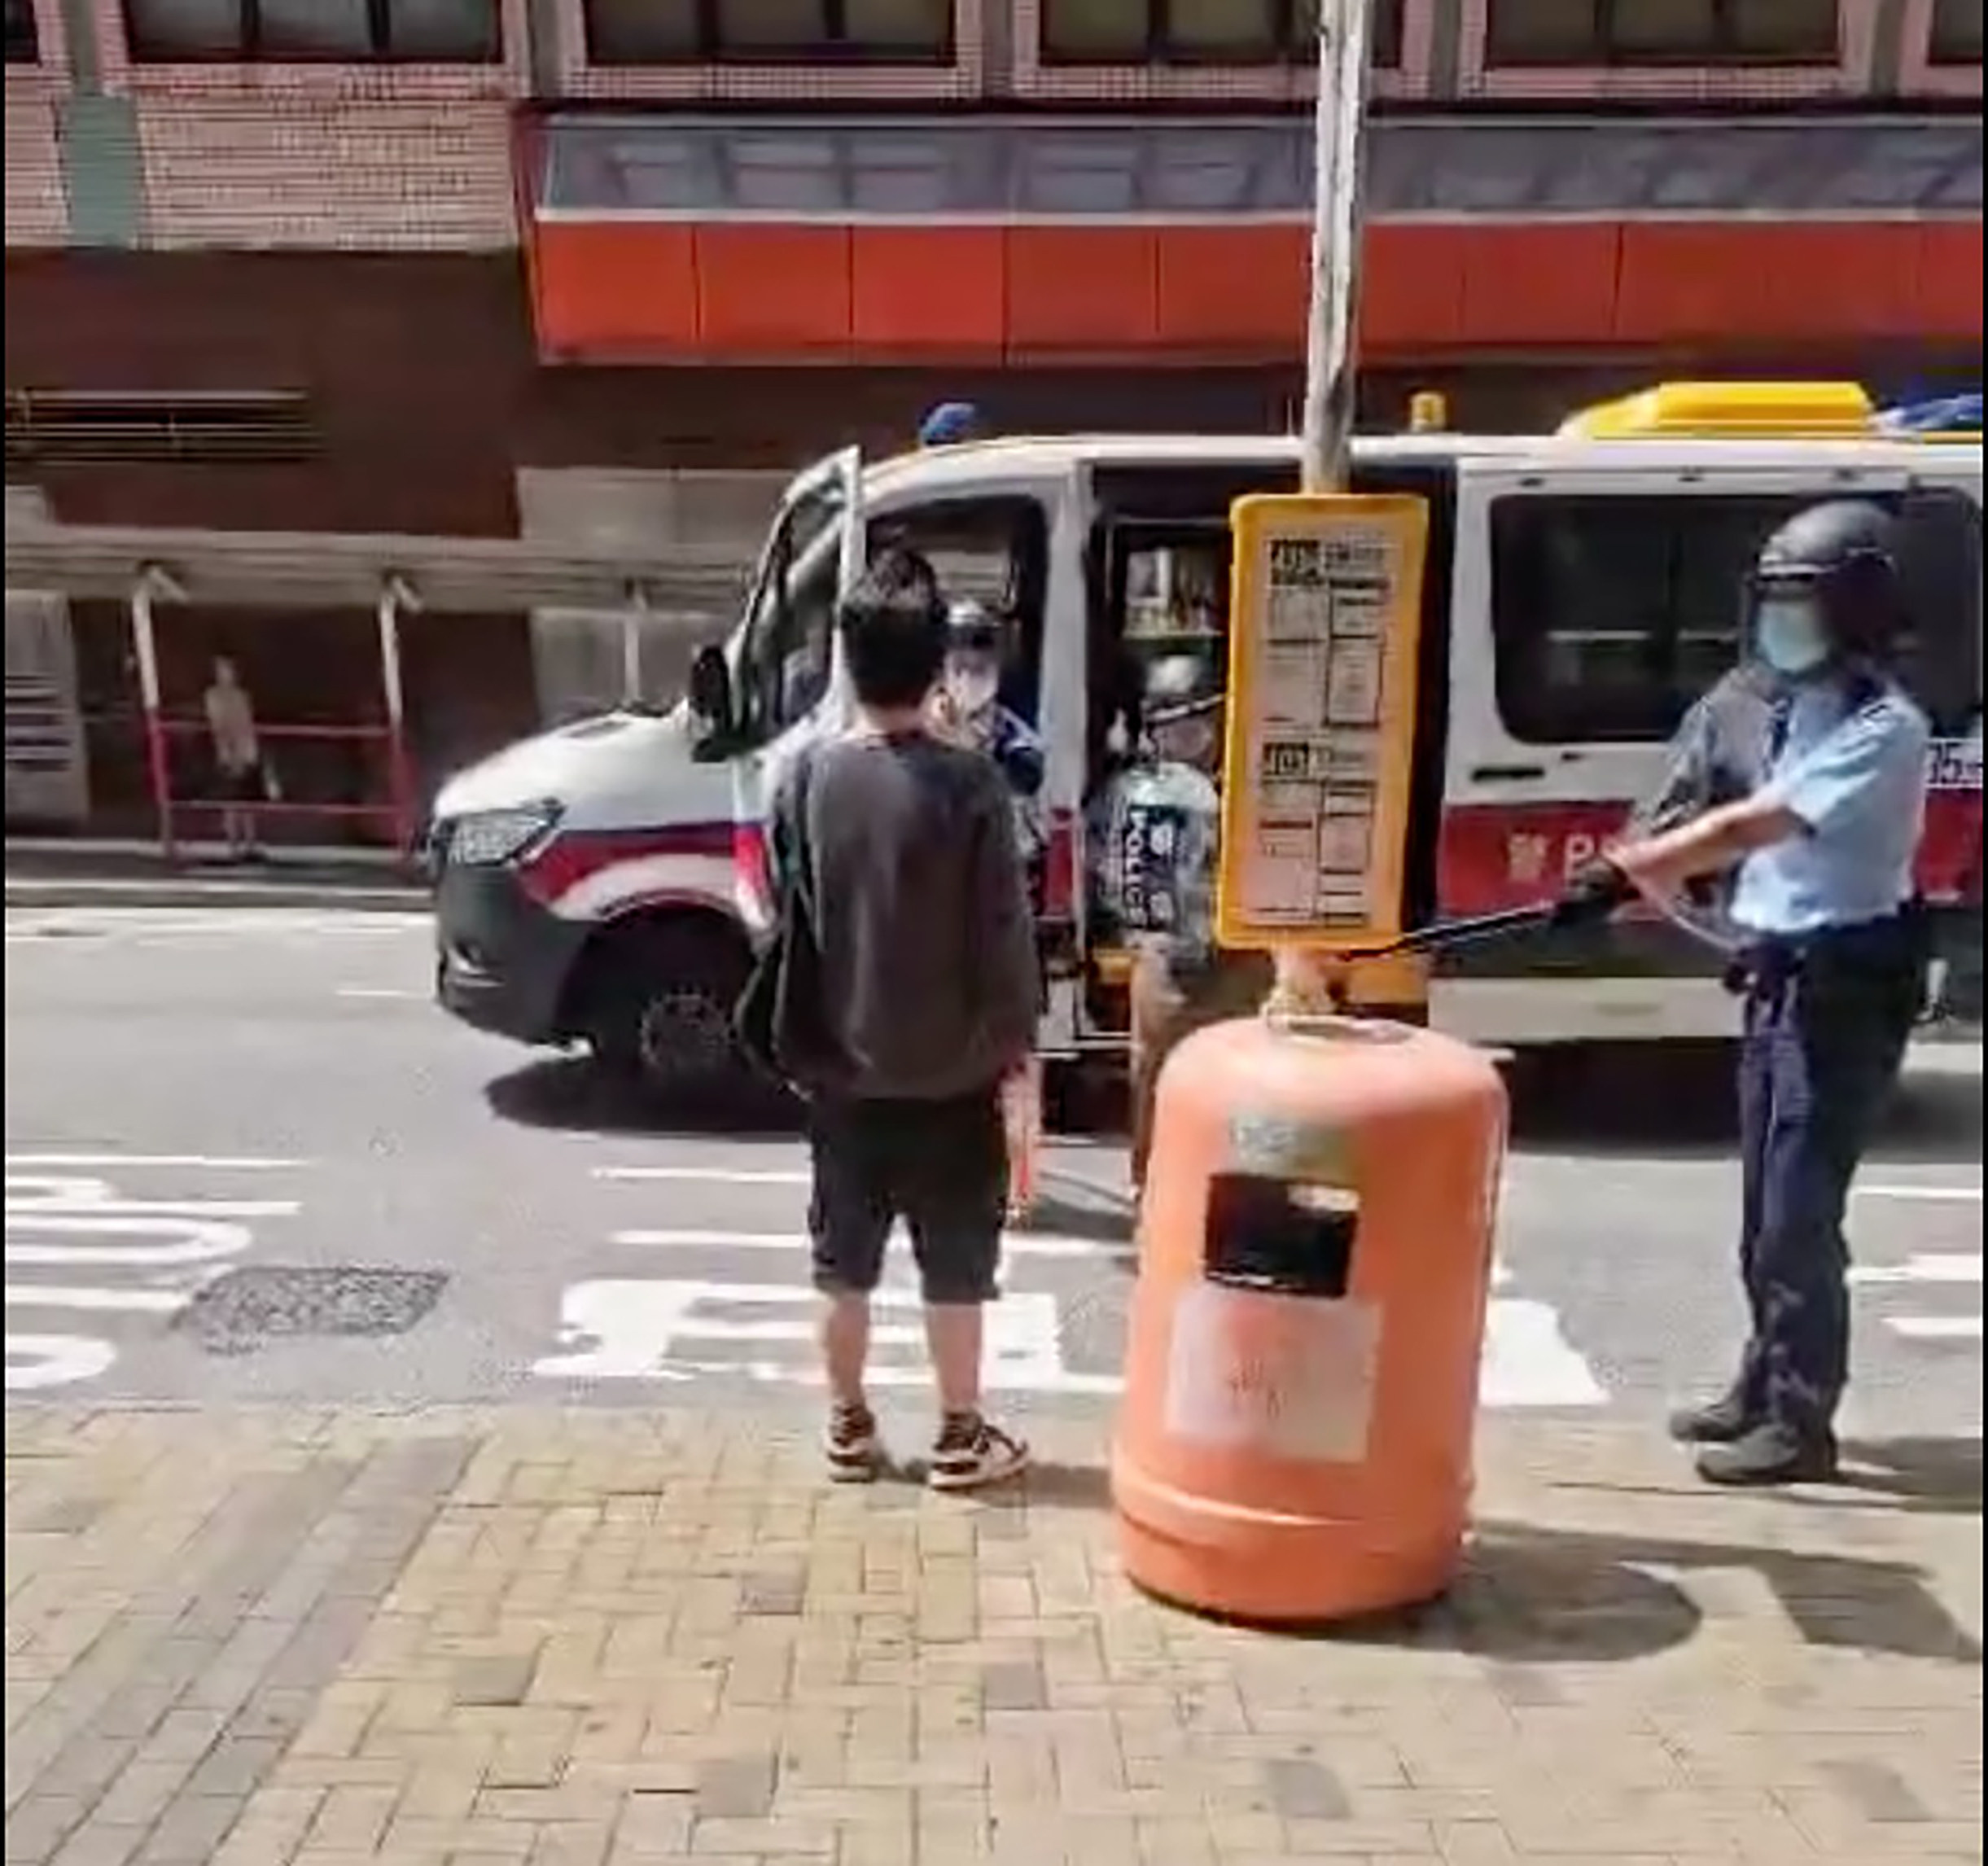 A video posted online shows three officers ordering a man to drop a knife. Photo: Facebook / @ 香港突發報料區